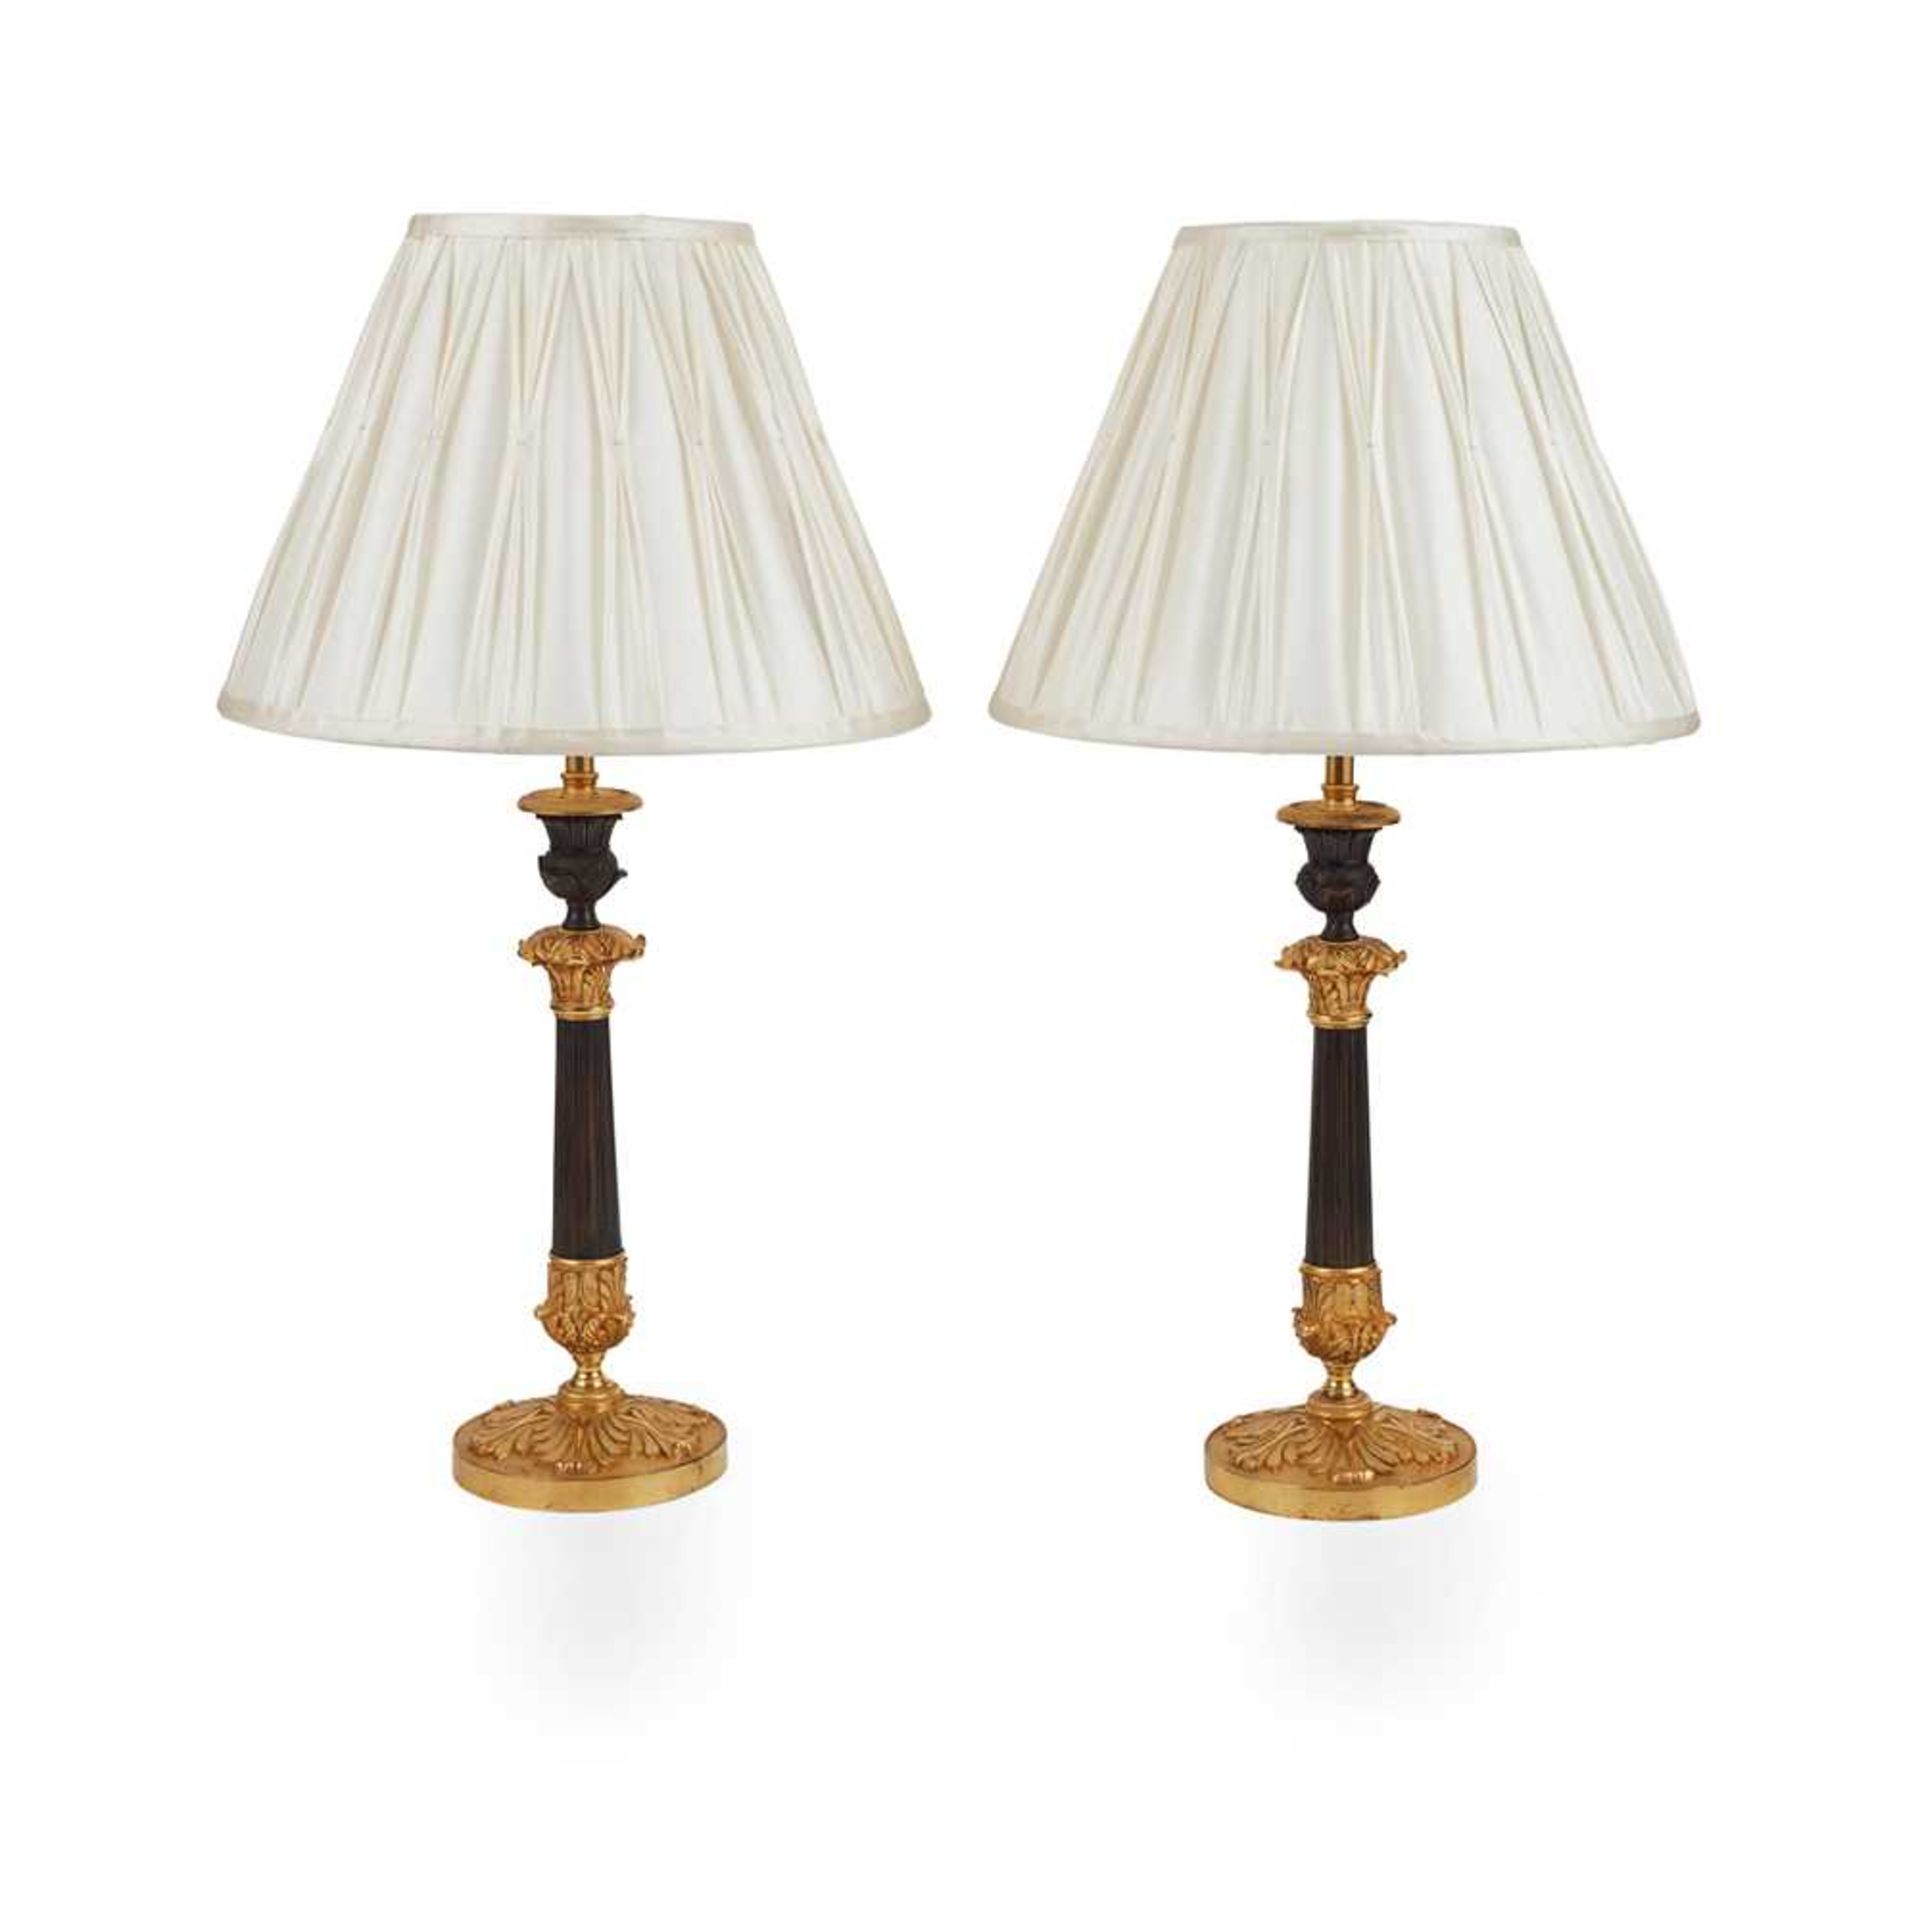 PAIR OF REGENCY PATINATED AND GILT BRONZE LAMPS EARLY 19TH CENTURY